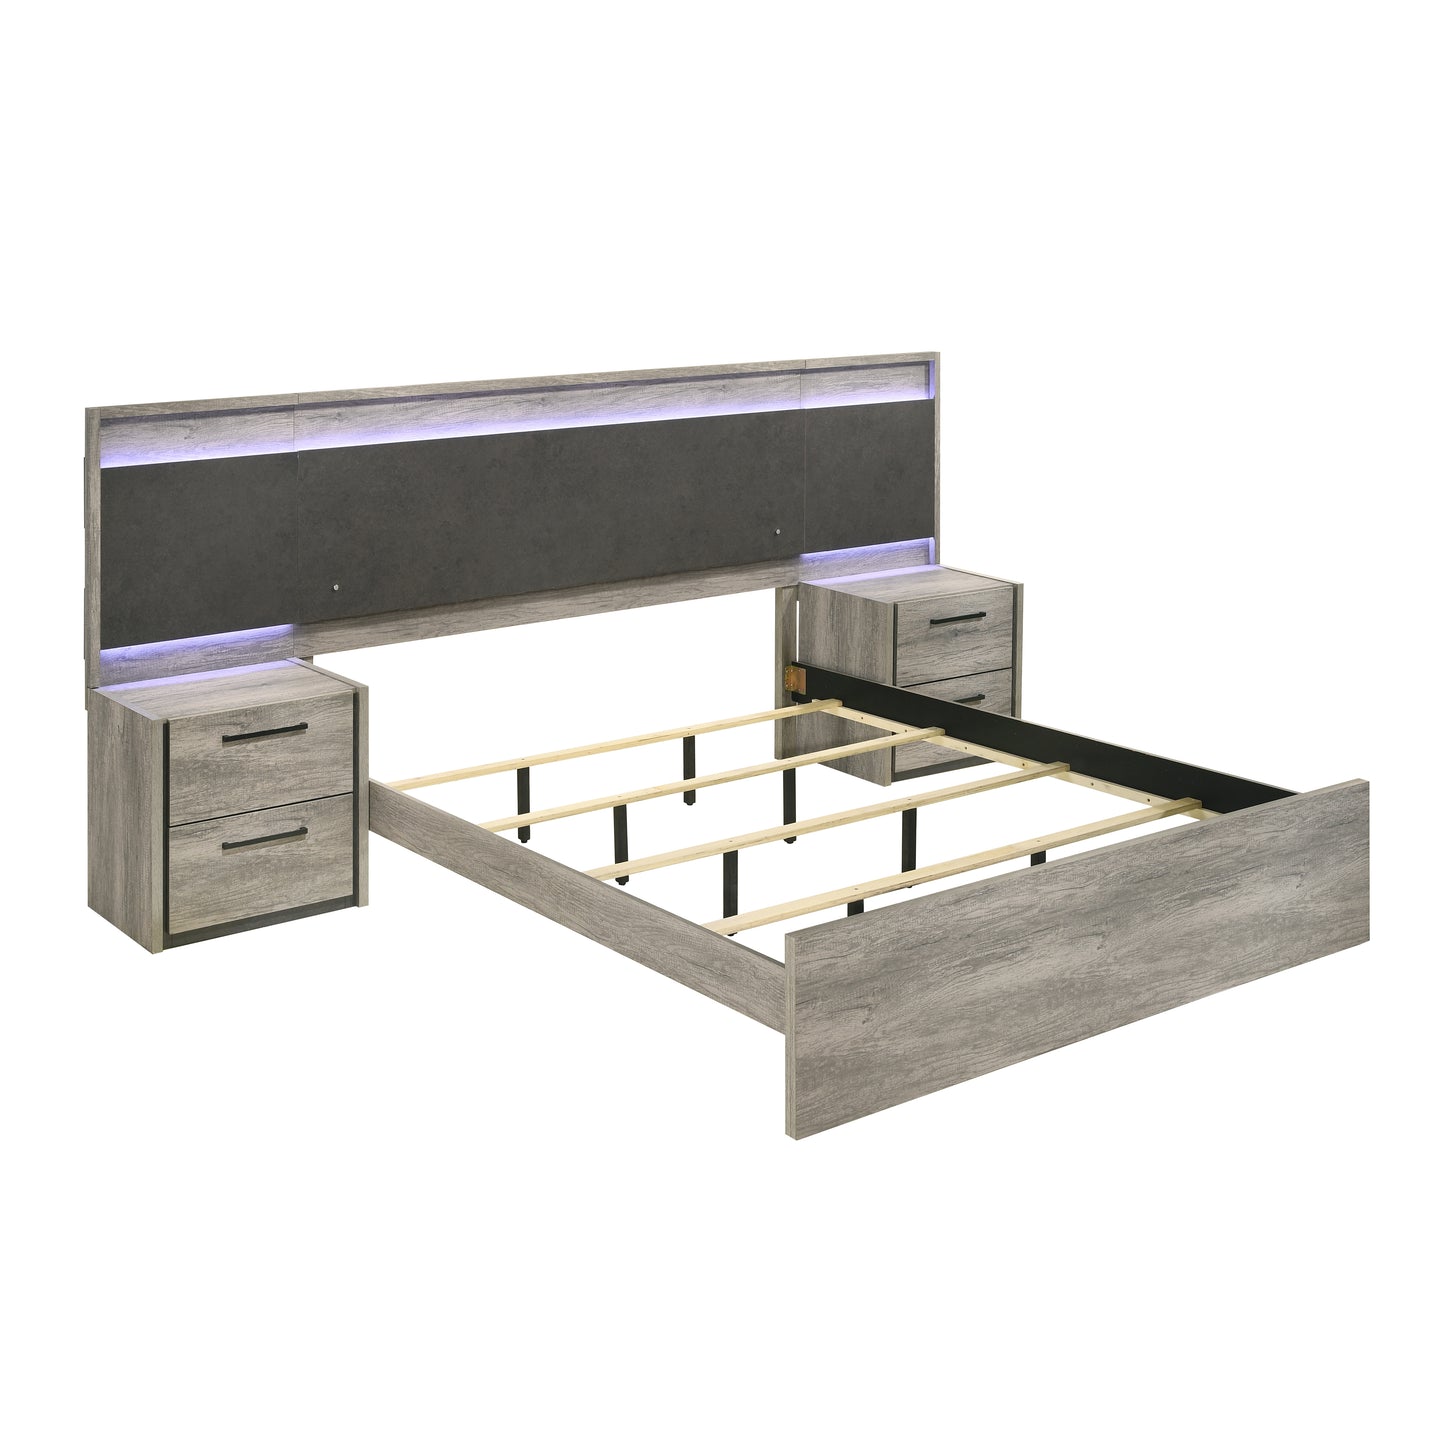 Roundhill Furniture Lenca LED Wallbed Collection - Weathered Gray